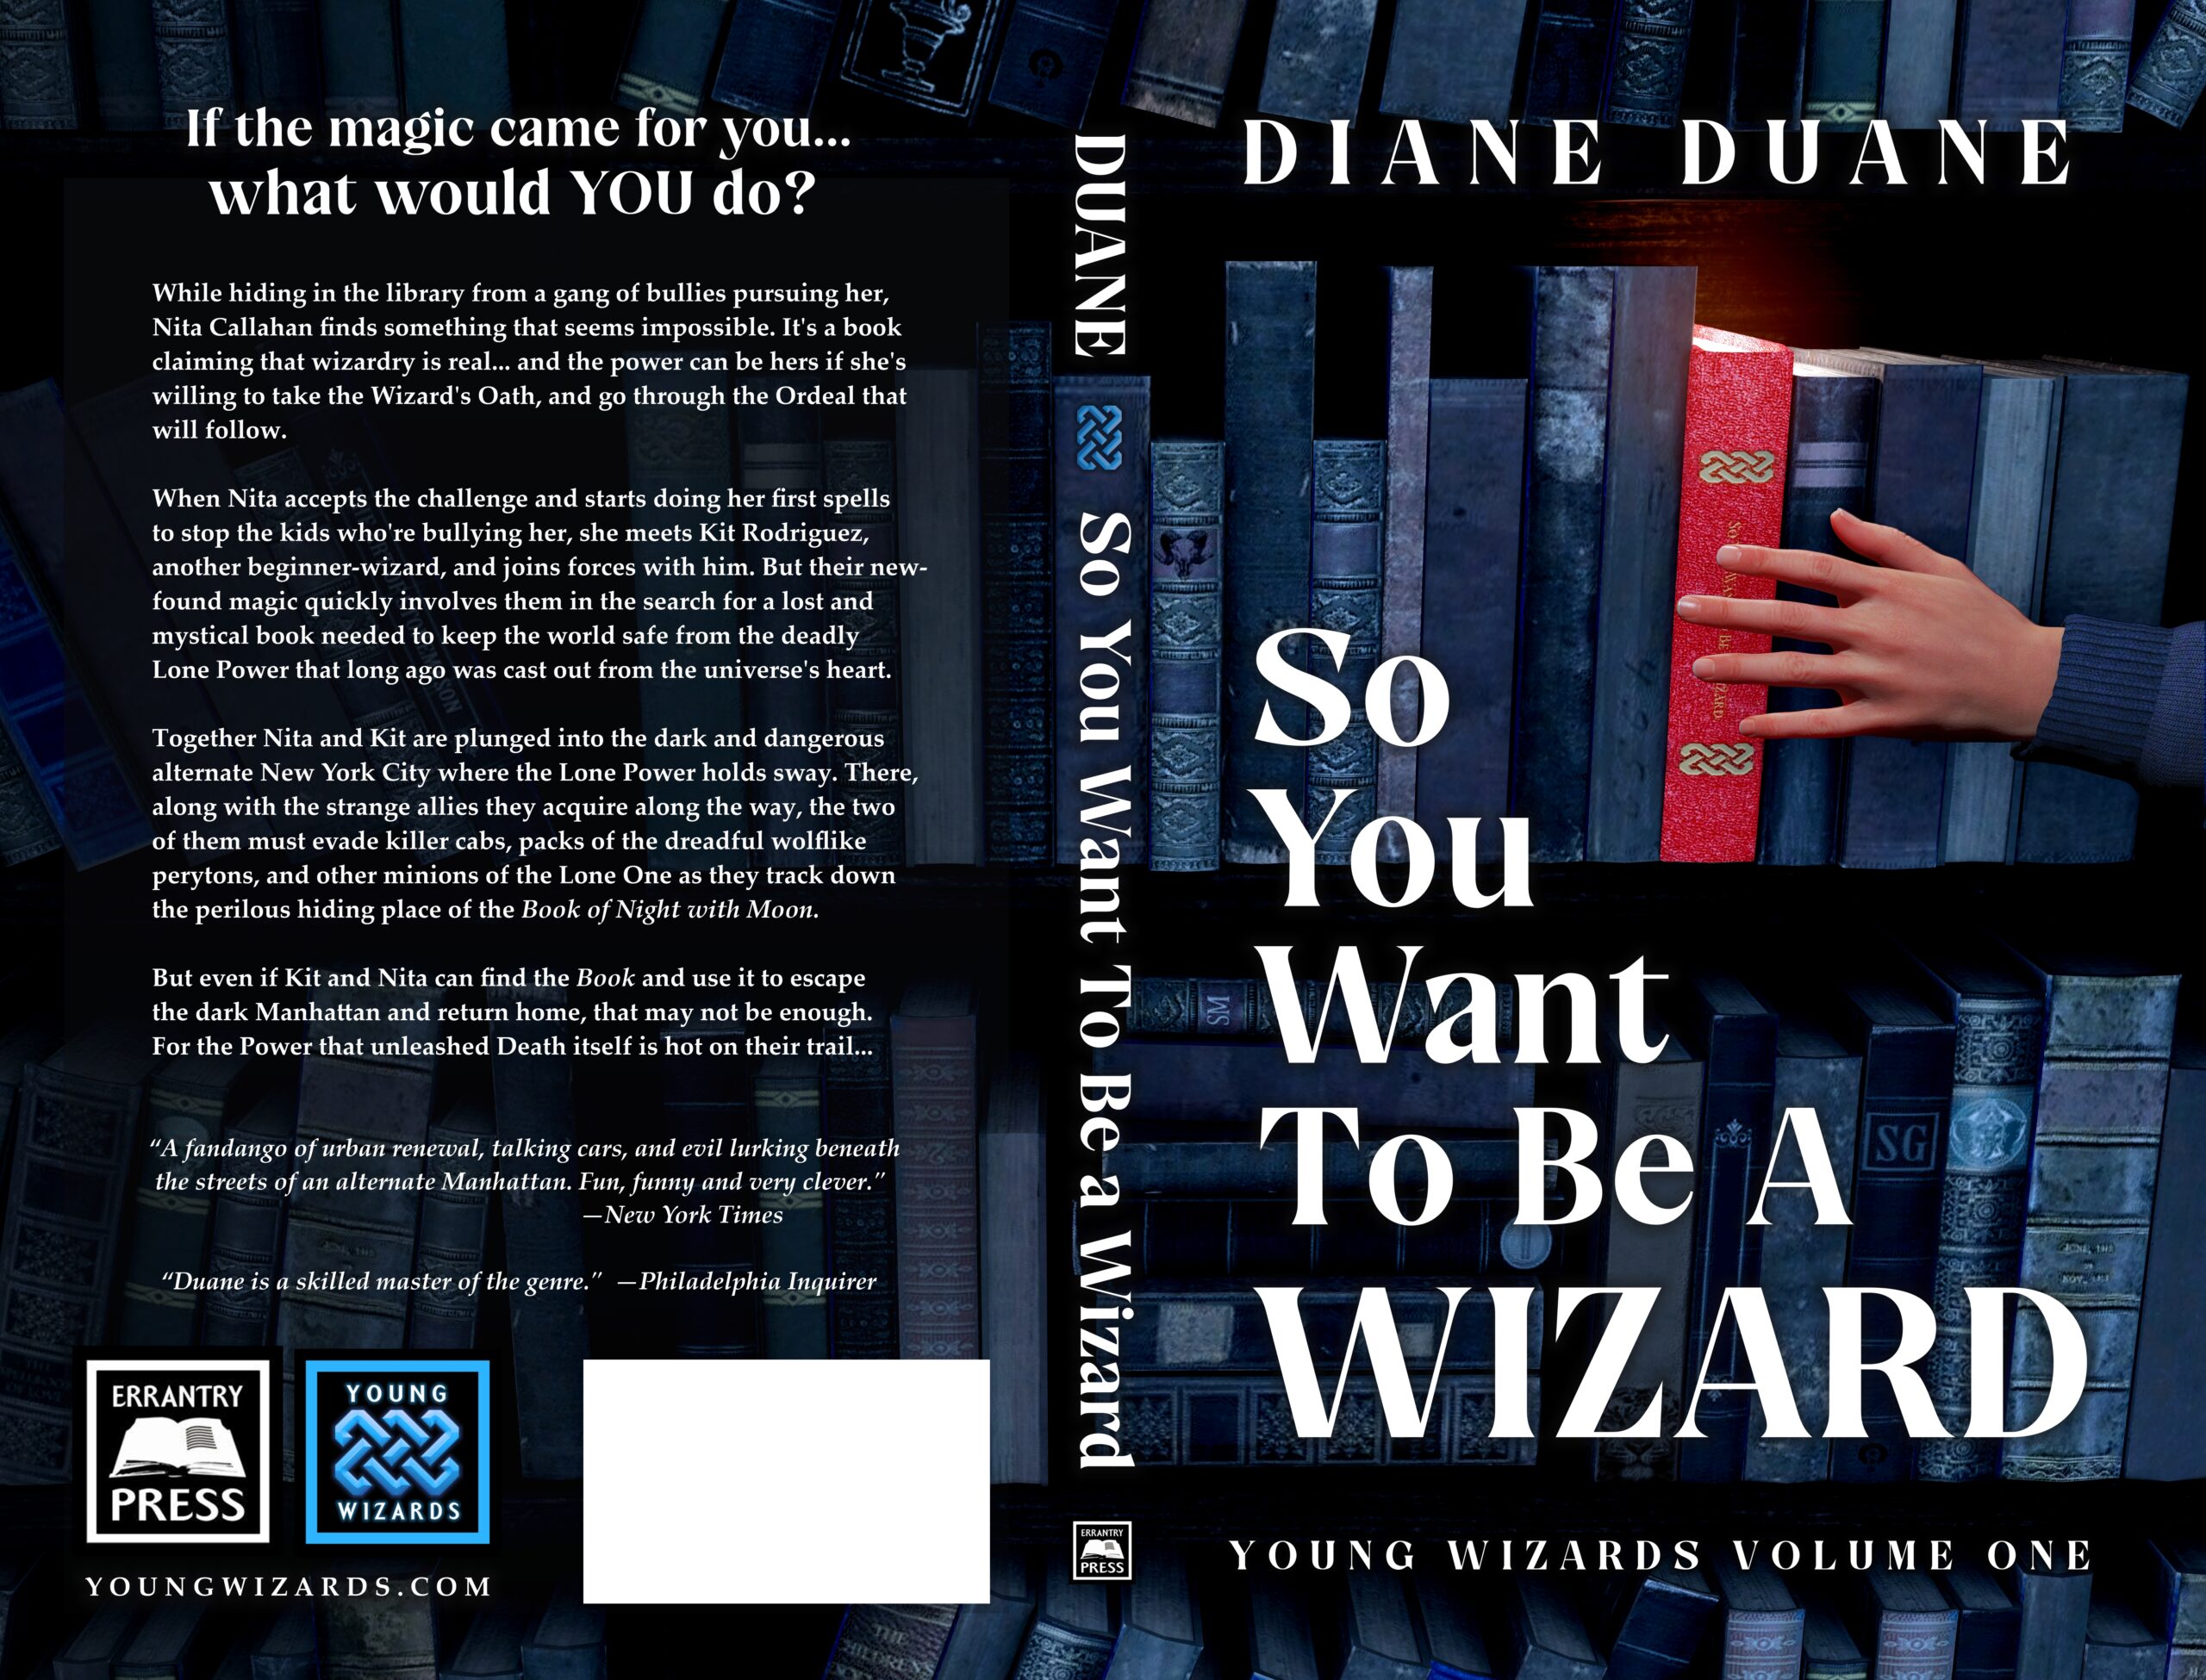 Cover for paperback international edition of SO YOU WANT TO BE A WIZARD